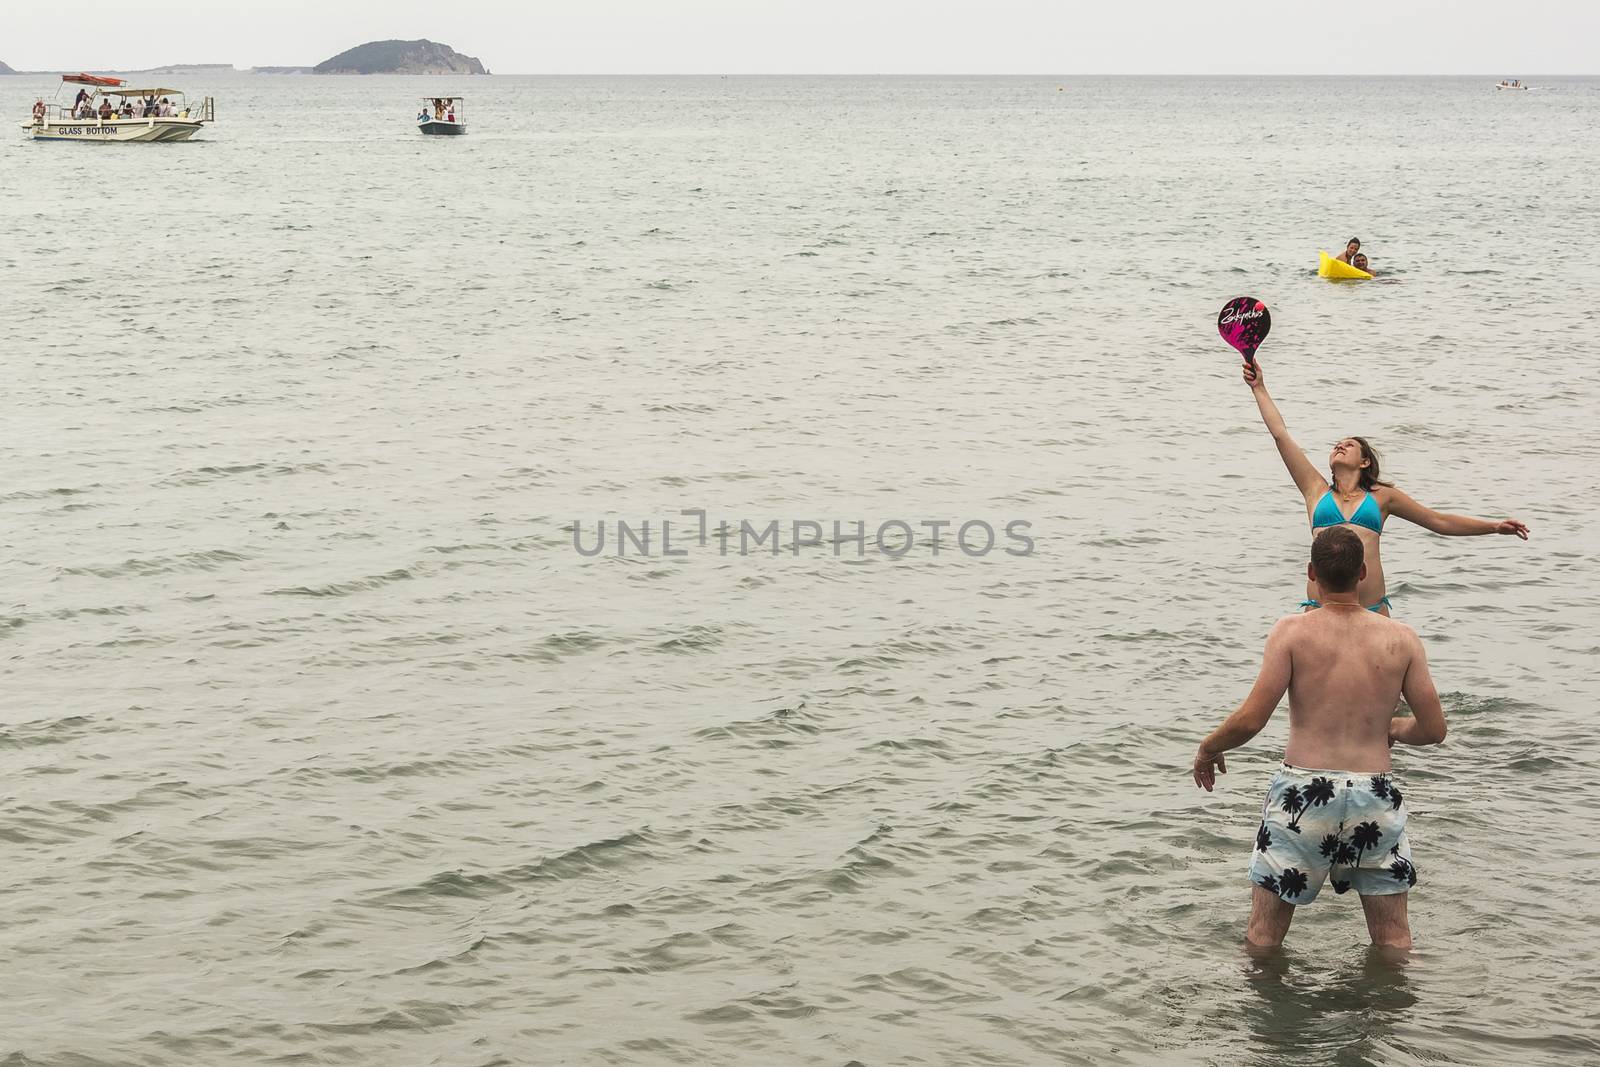 Greece, Zakynthos Island - June 19, 2016: Young woman and young man playing games standing in water